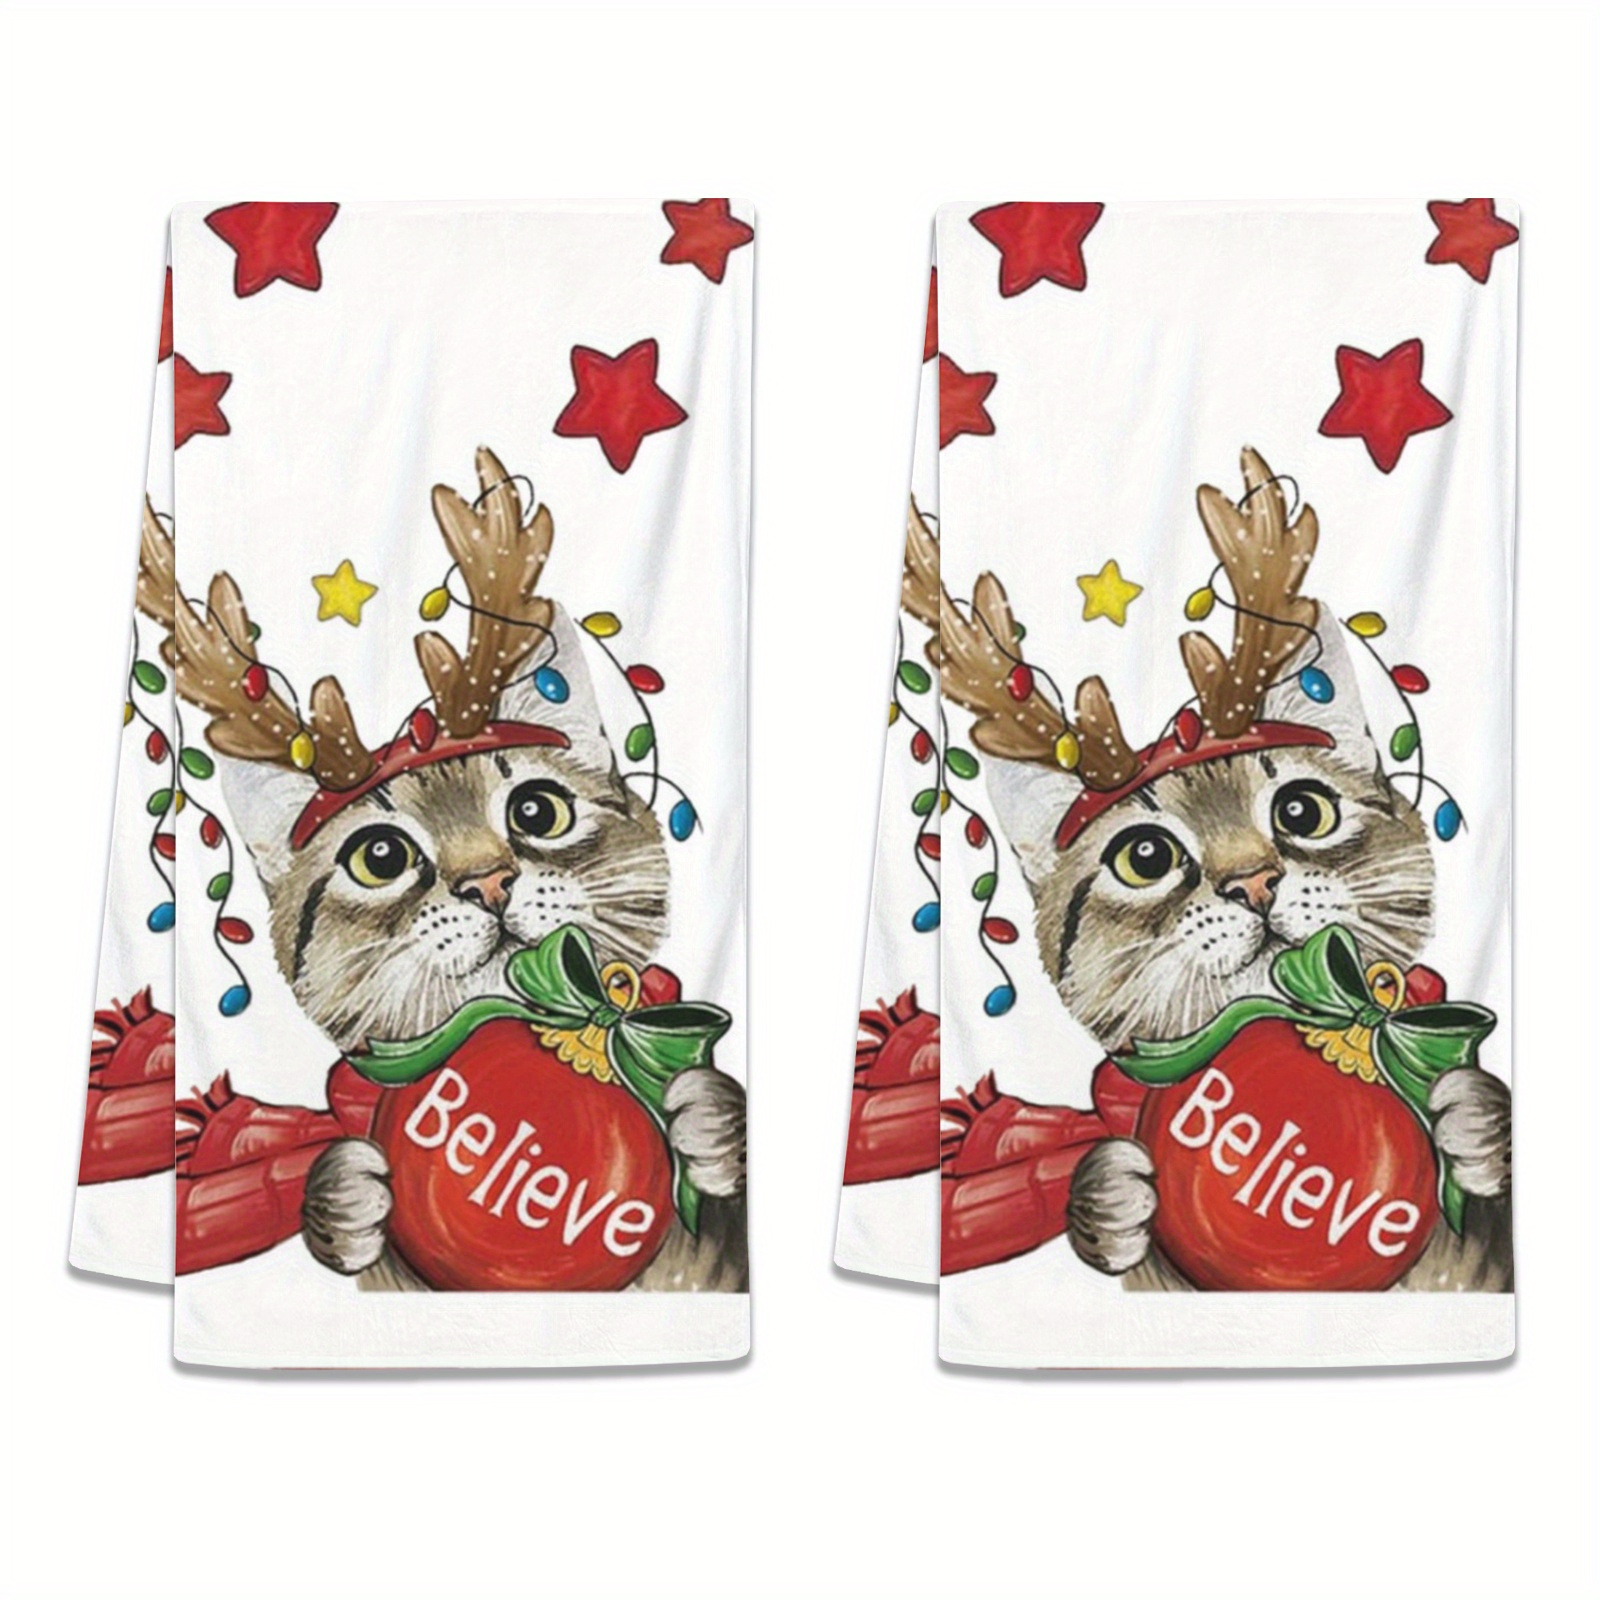 

Merry Christmas Cat-themed Kitchen Towels - Ultra Absorbent, 18x26 Inch Polyester Dishcloths For Holiday Cooking & Baking, Hand Wash Only